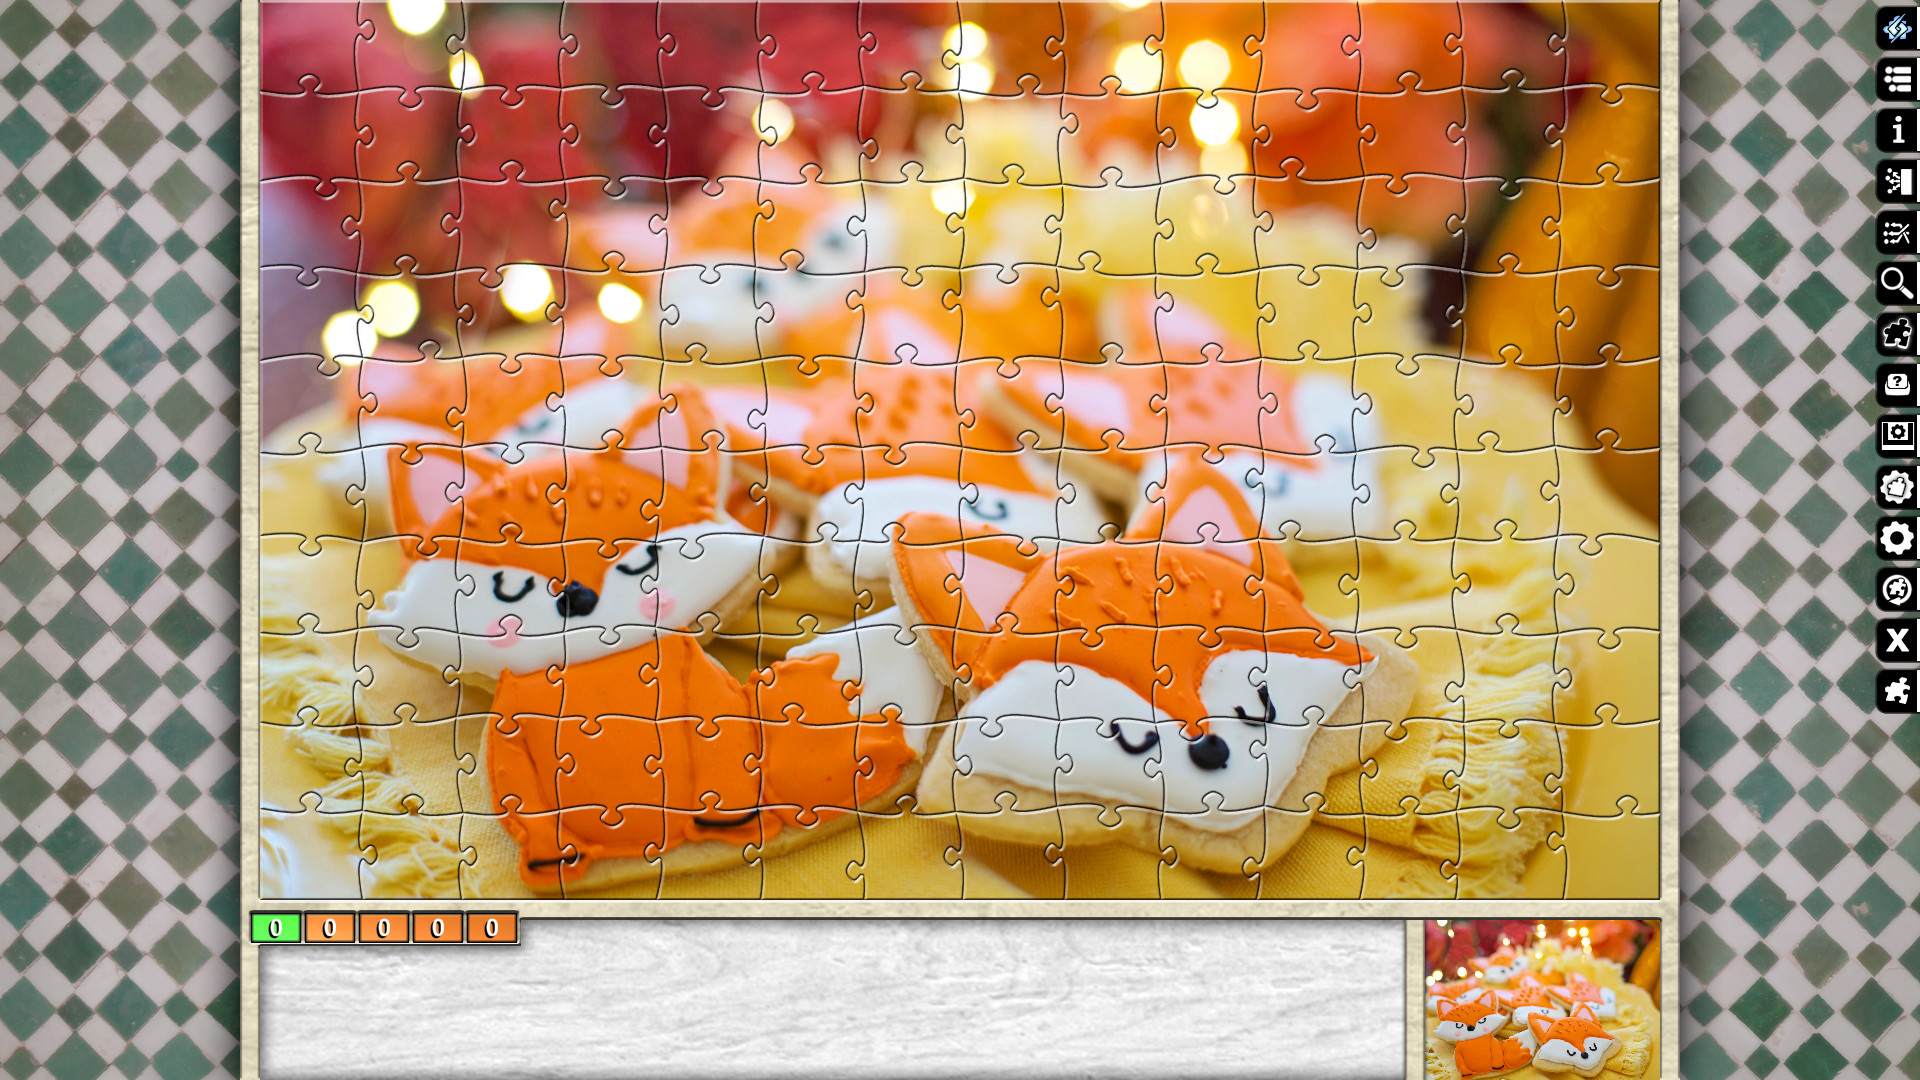 Jigsaw Puzzle Pack - Pixel Puzzles Ultimate: Variety Pack 19 Featured Screenshot #1